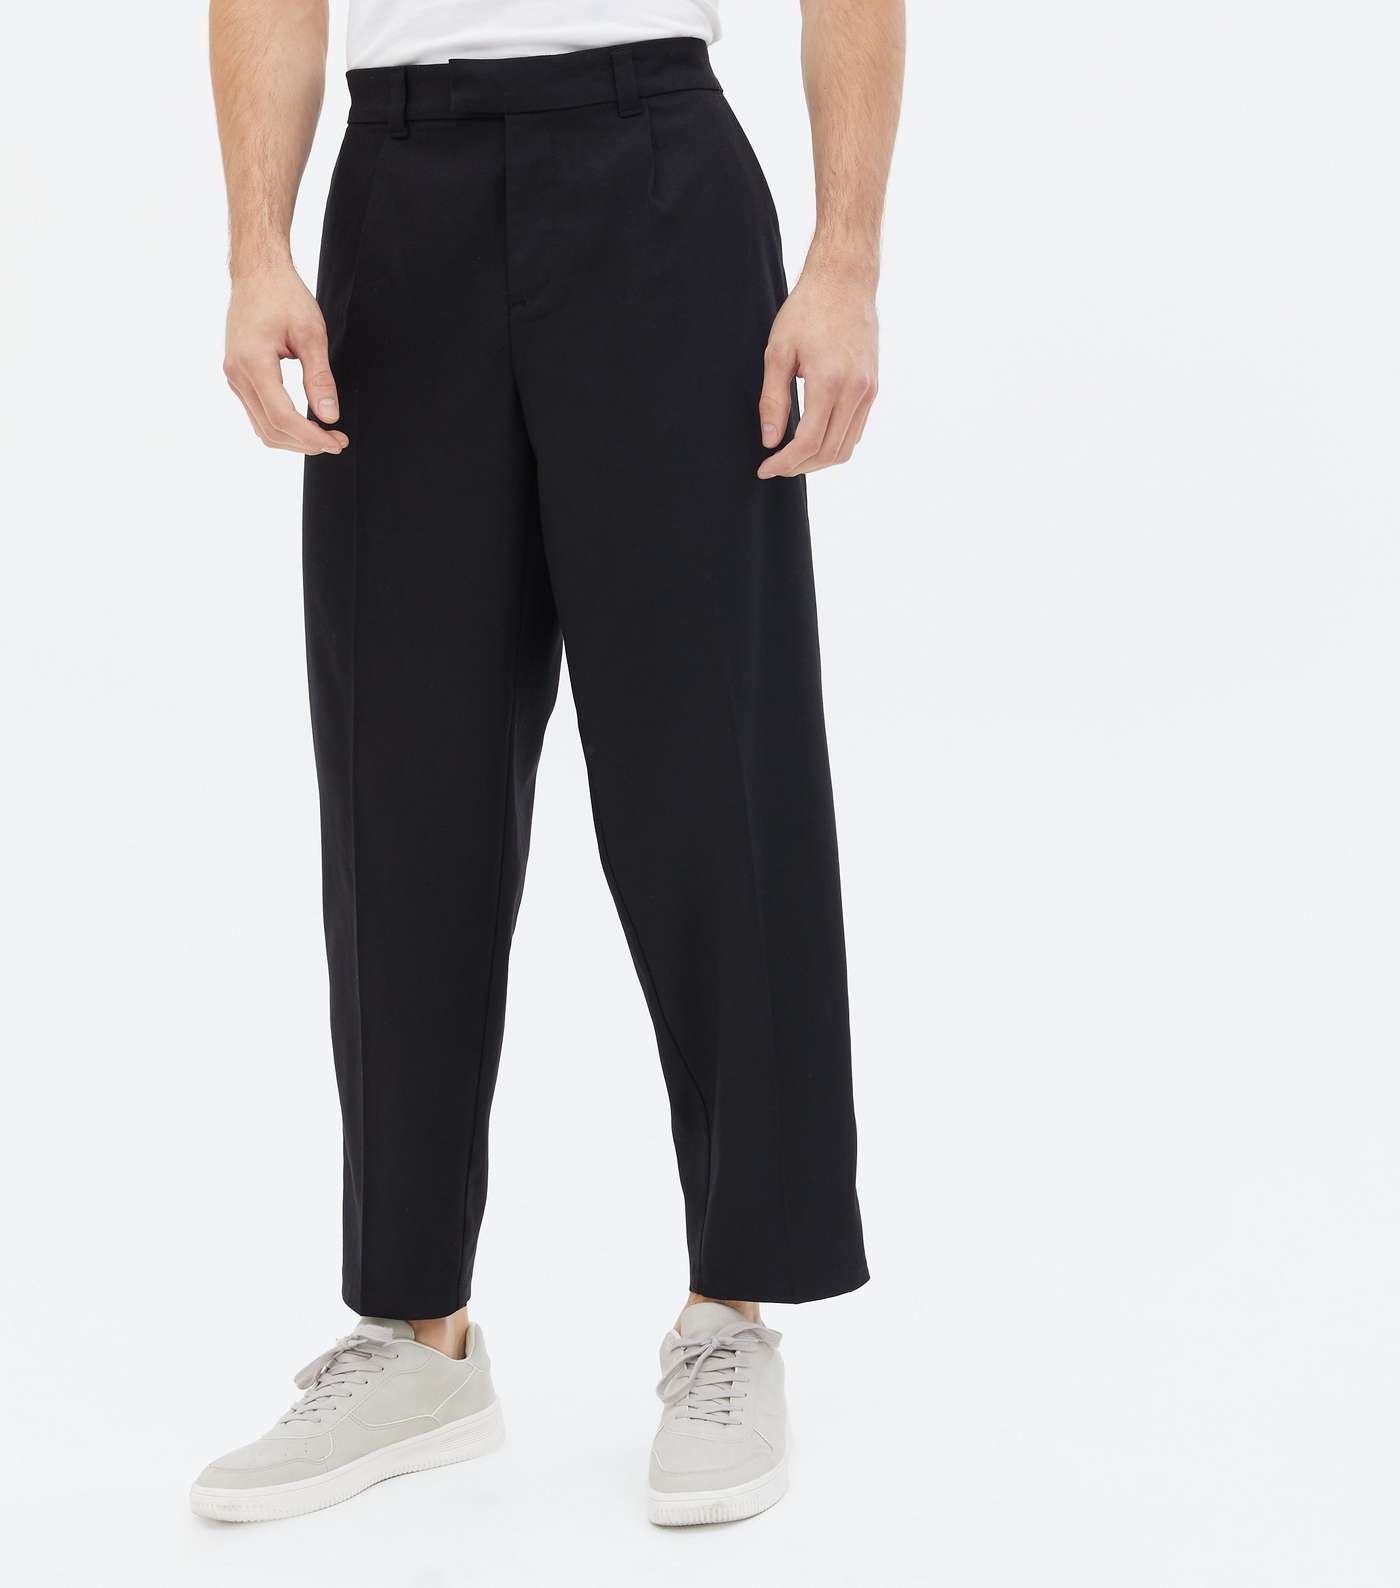 Black Relaxed Fit Straight Leg Trousers Image 2